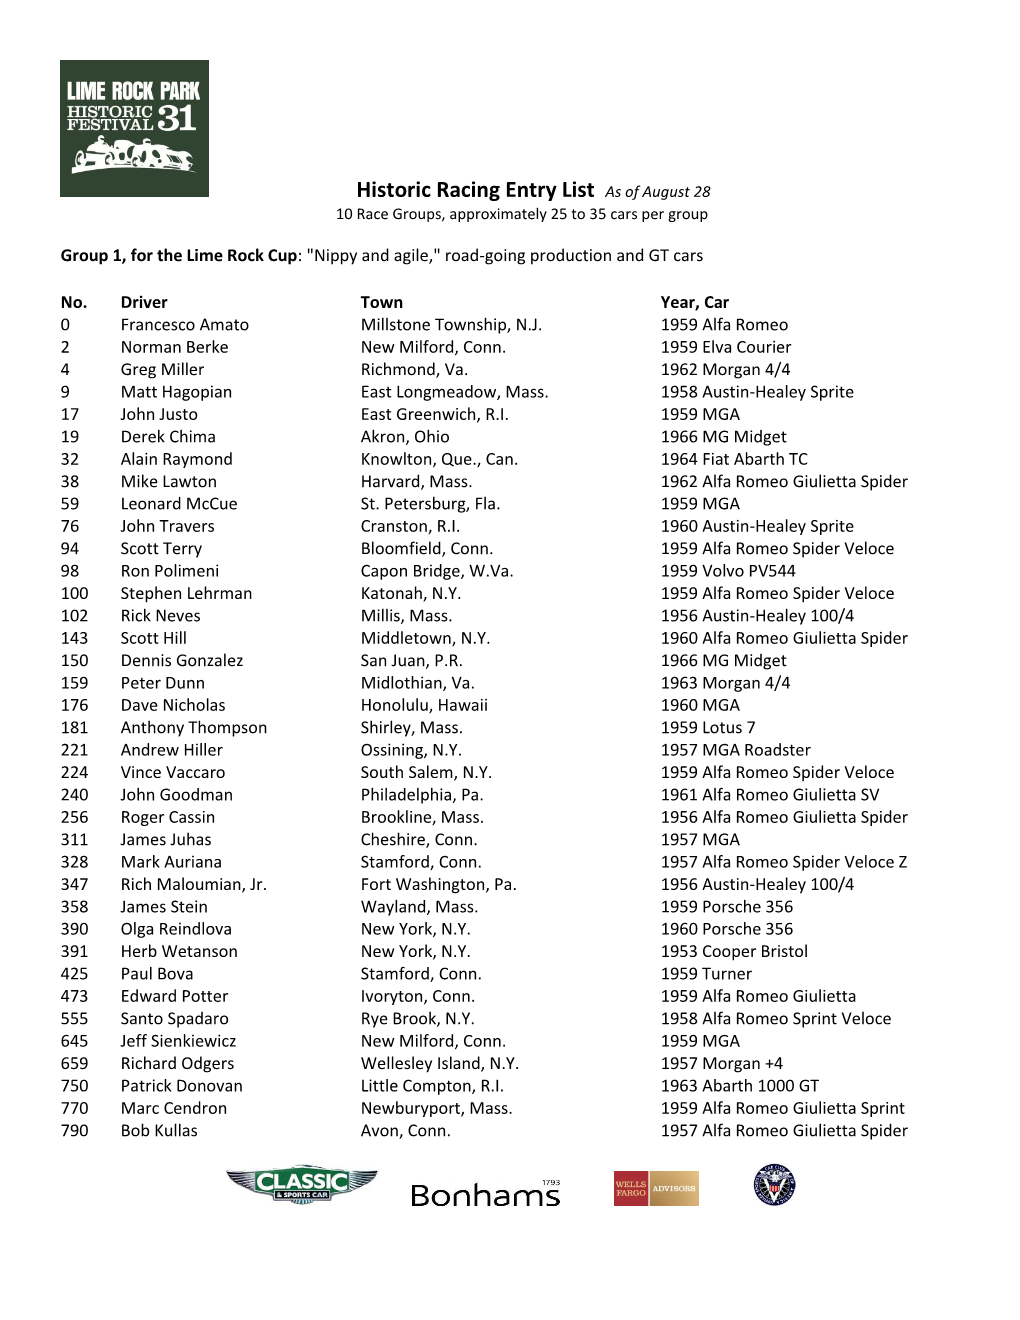 Historic Racing Entry List As of August 28 10 Race Groups, Approximately 25 to 35 Cars Per Group